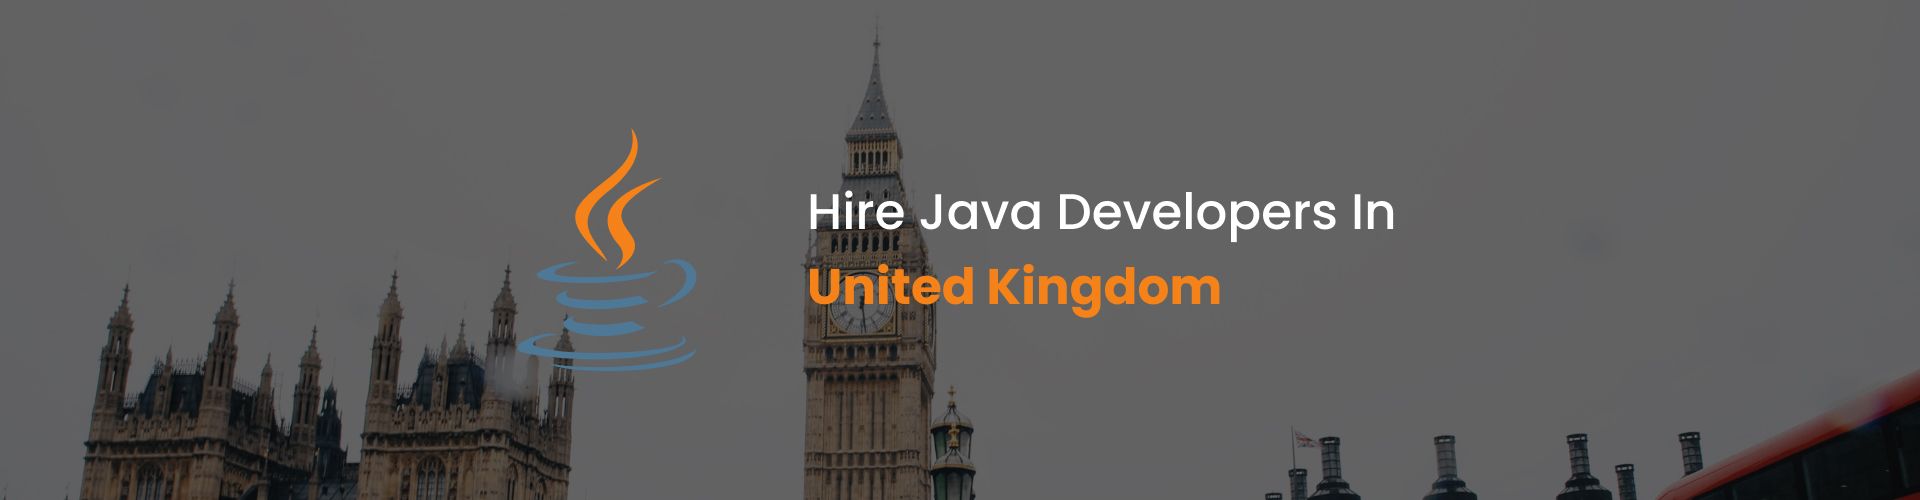 hire java developers in united kingdom